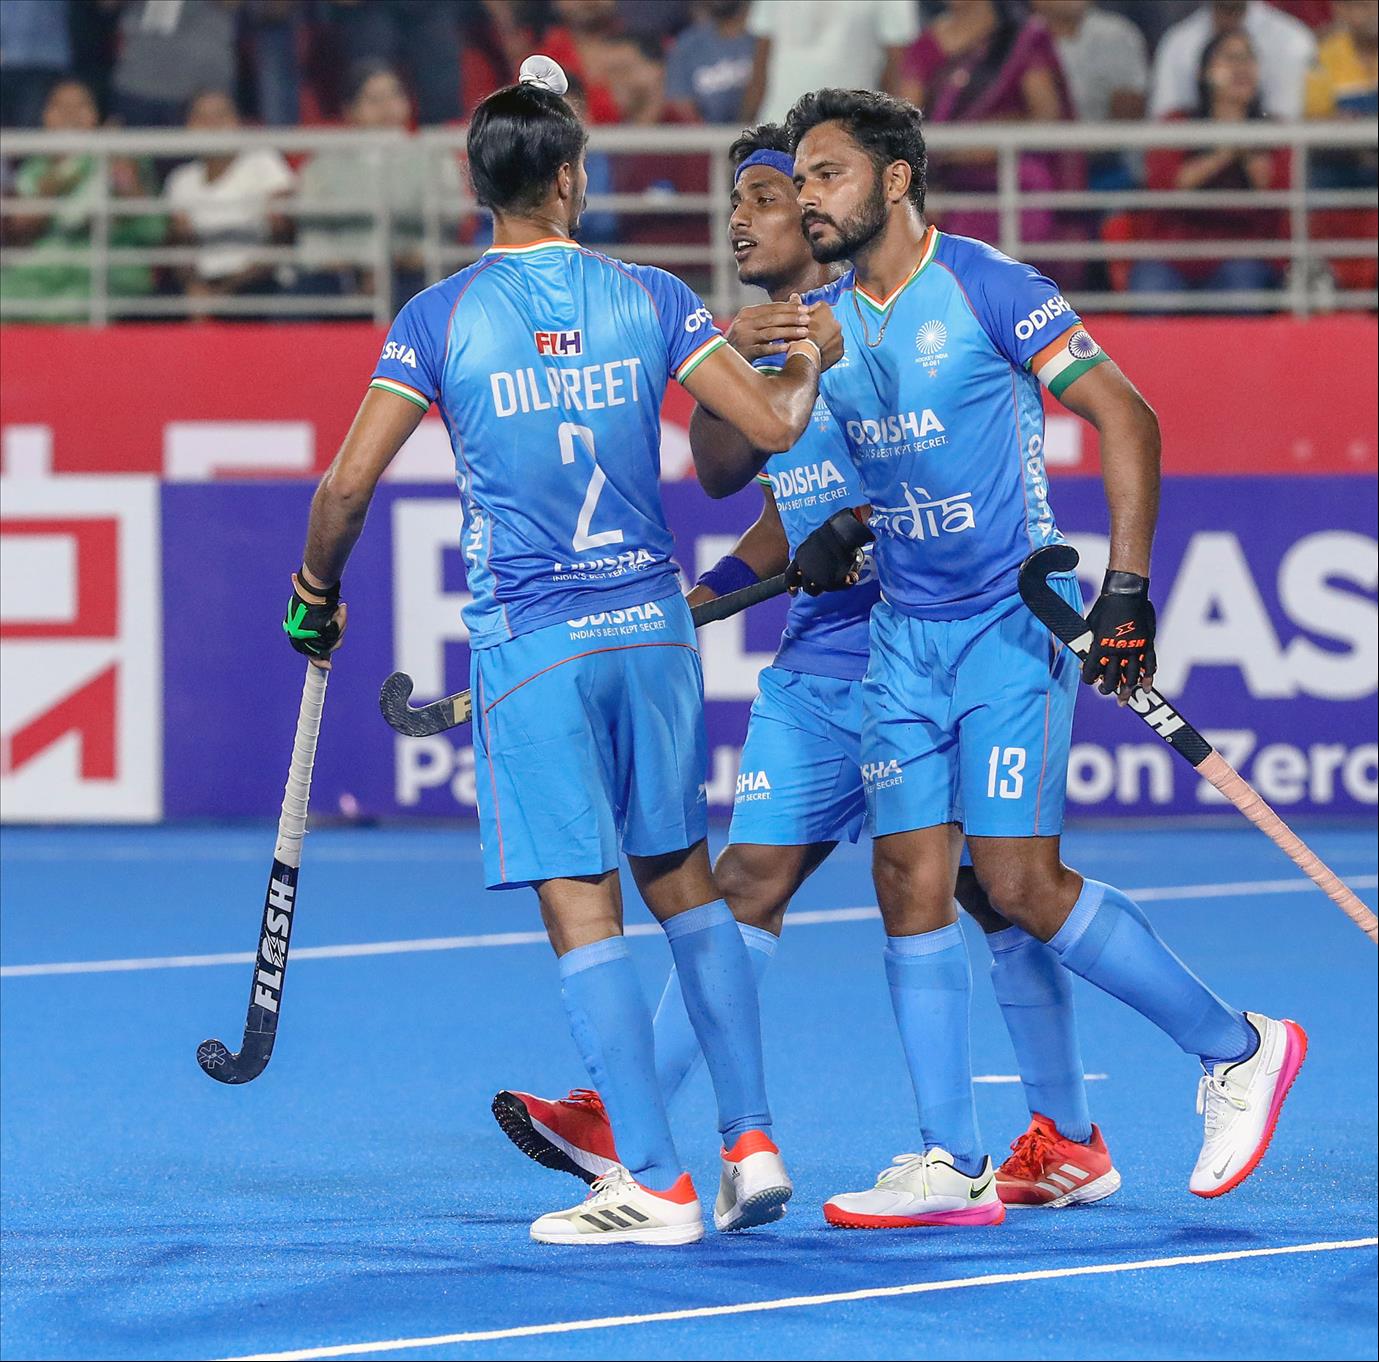 Asian Games: Indian Men Start Hockey Campaign With Uzbekistan Clash, But Focus Remains On Gold (Ld)